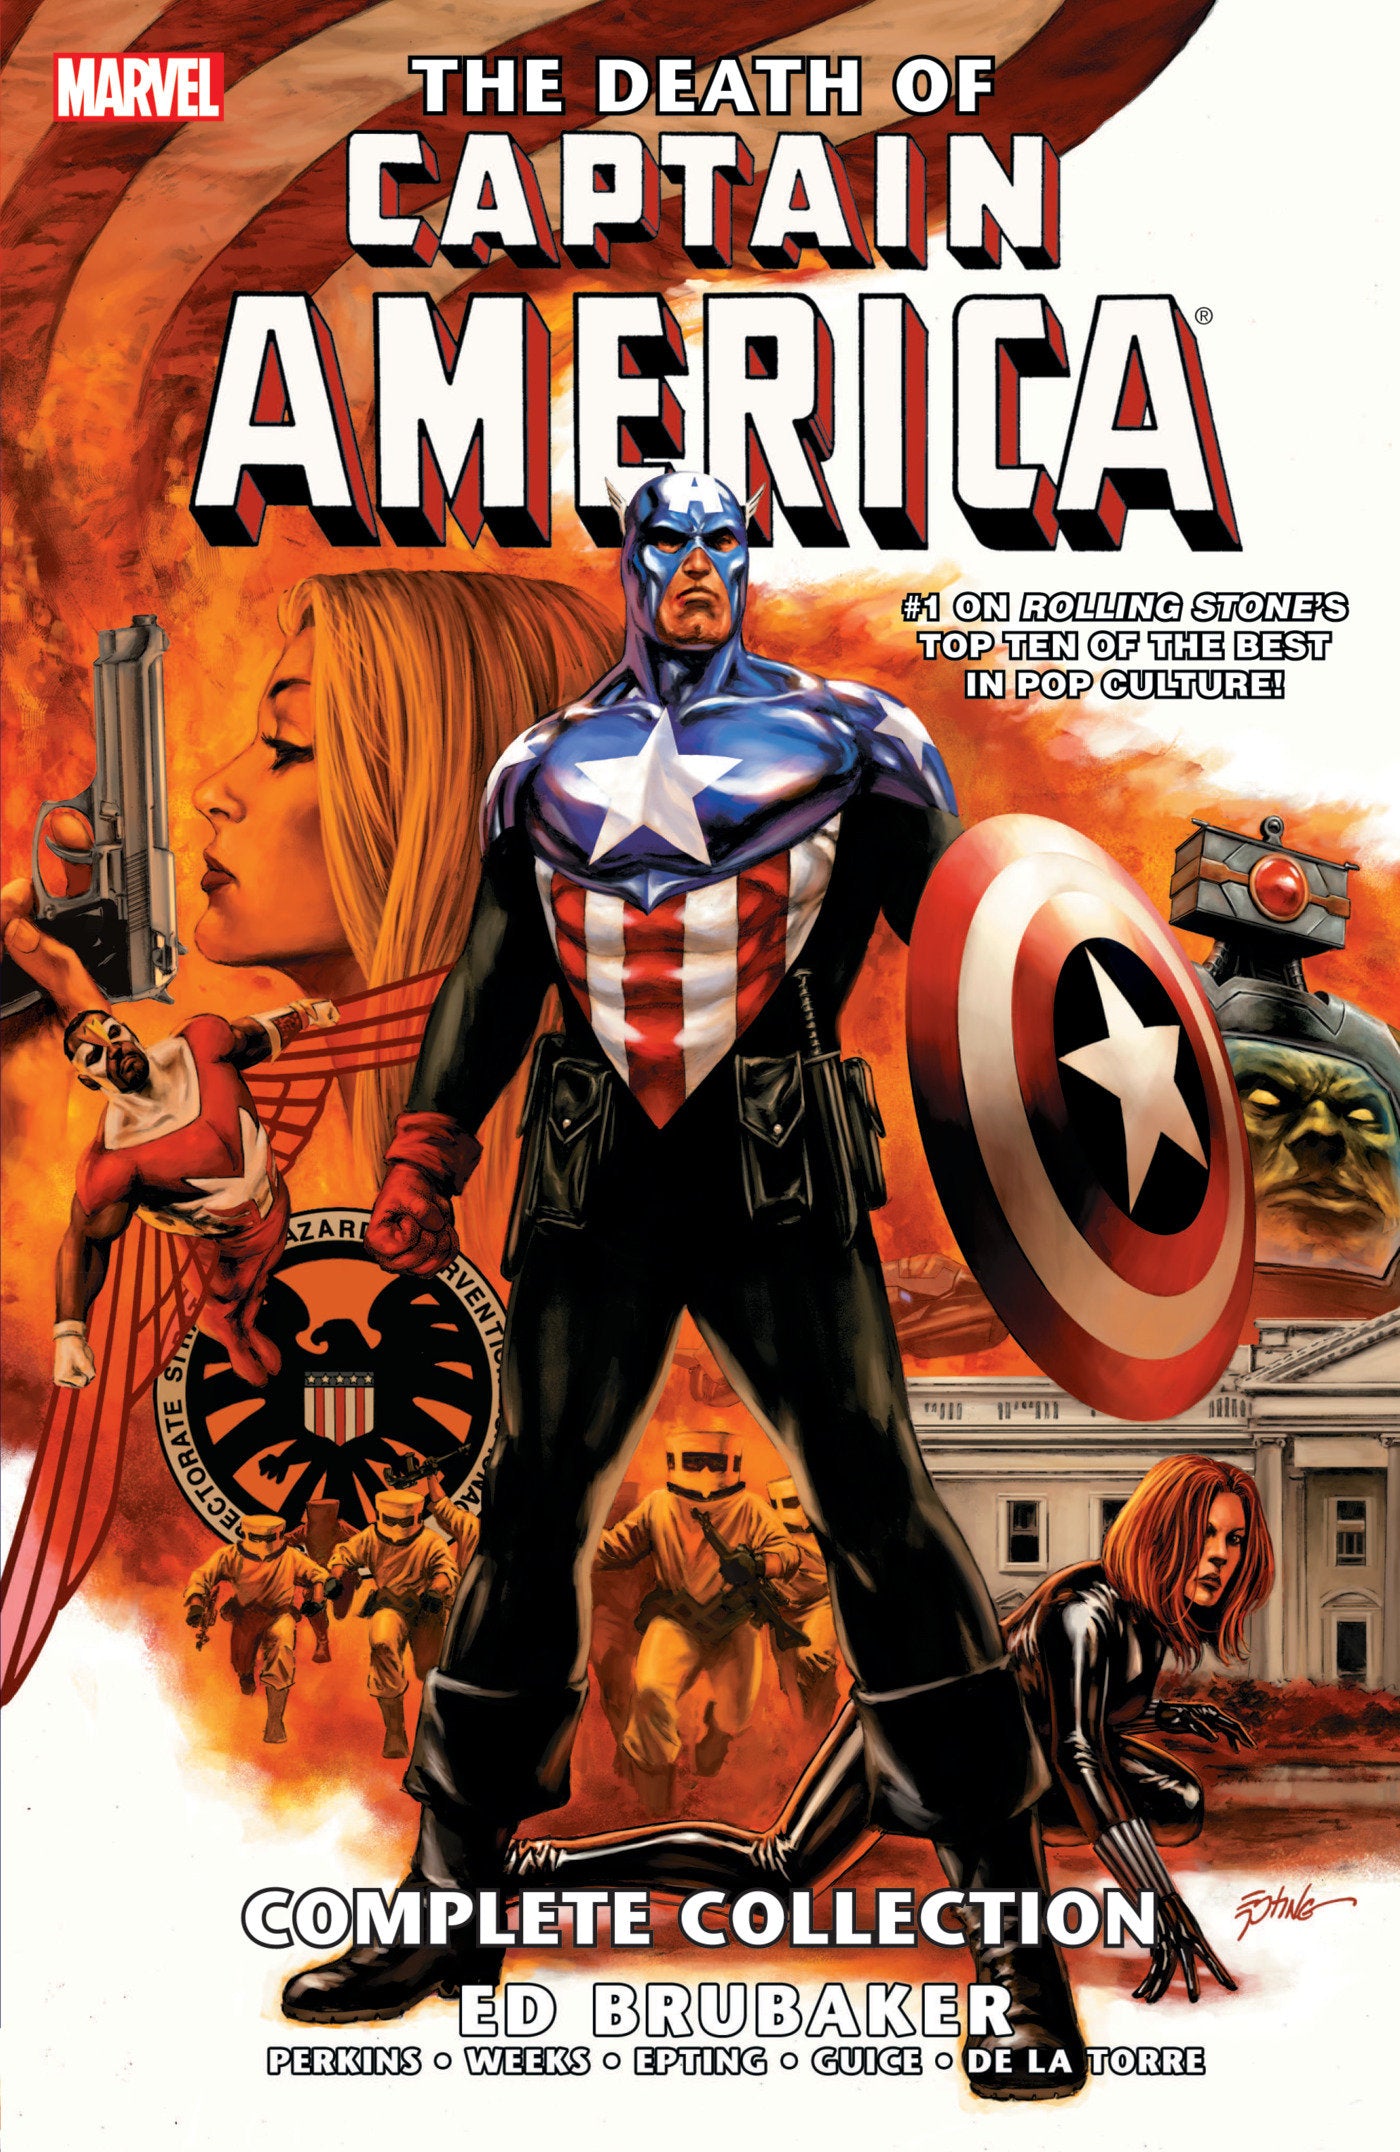 CAPTAIN AMERICA: THE DEATH OF CAPTAIN AMERICA - THE COMPLETE COLLECTION TRADE PAPERBACK